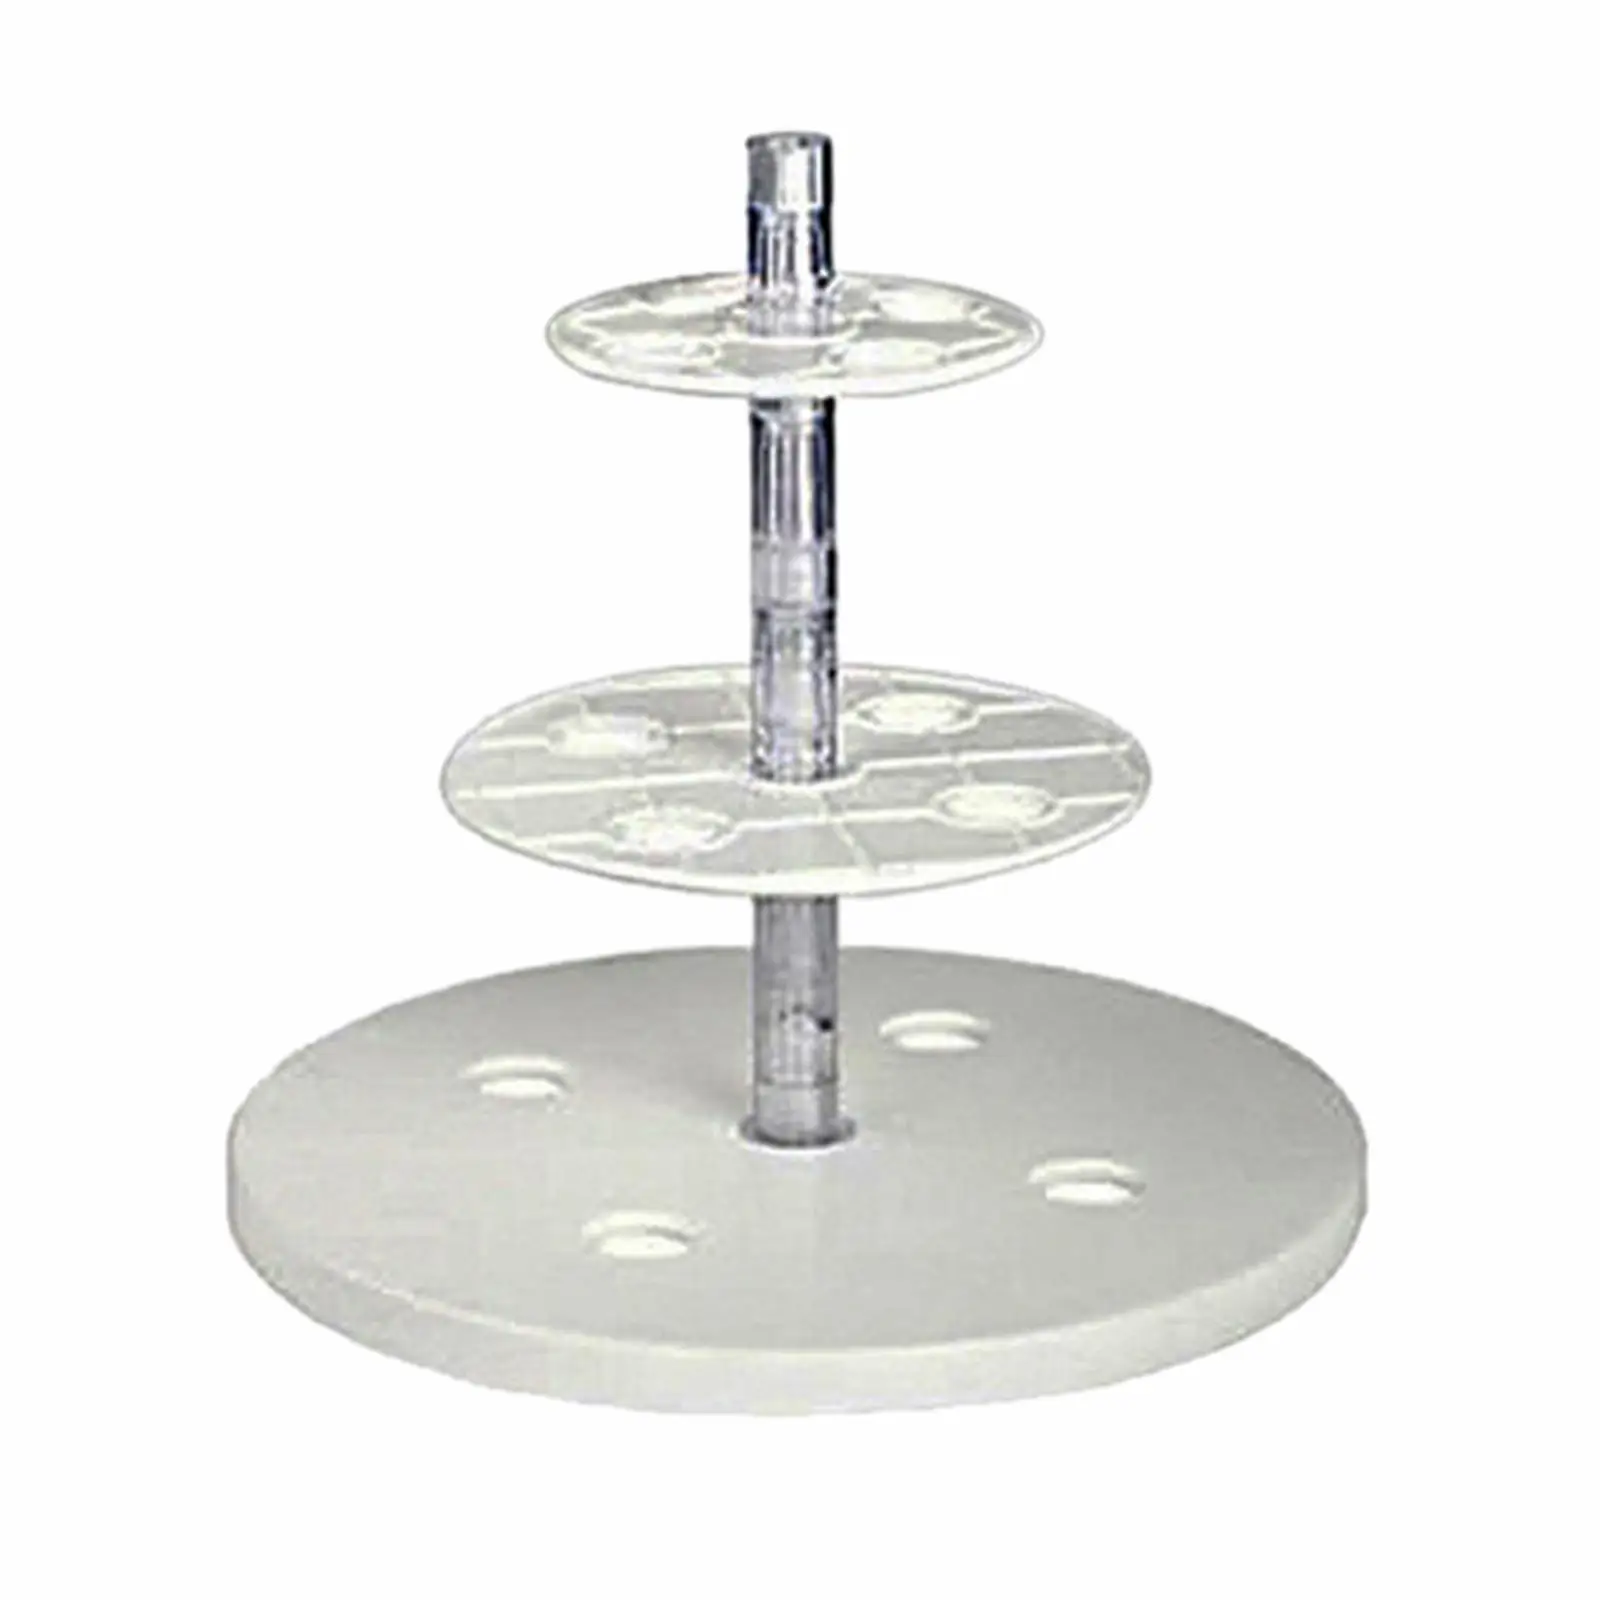 3 Tier Cake Stand Pastry Stand Pouring Cake Stand Centerpiece Tier Cake Support for Wedding Birthday Parties Celebration Cupcake